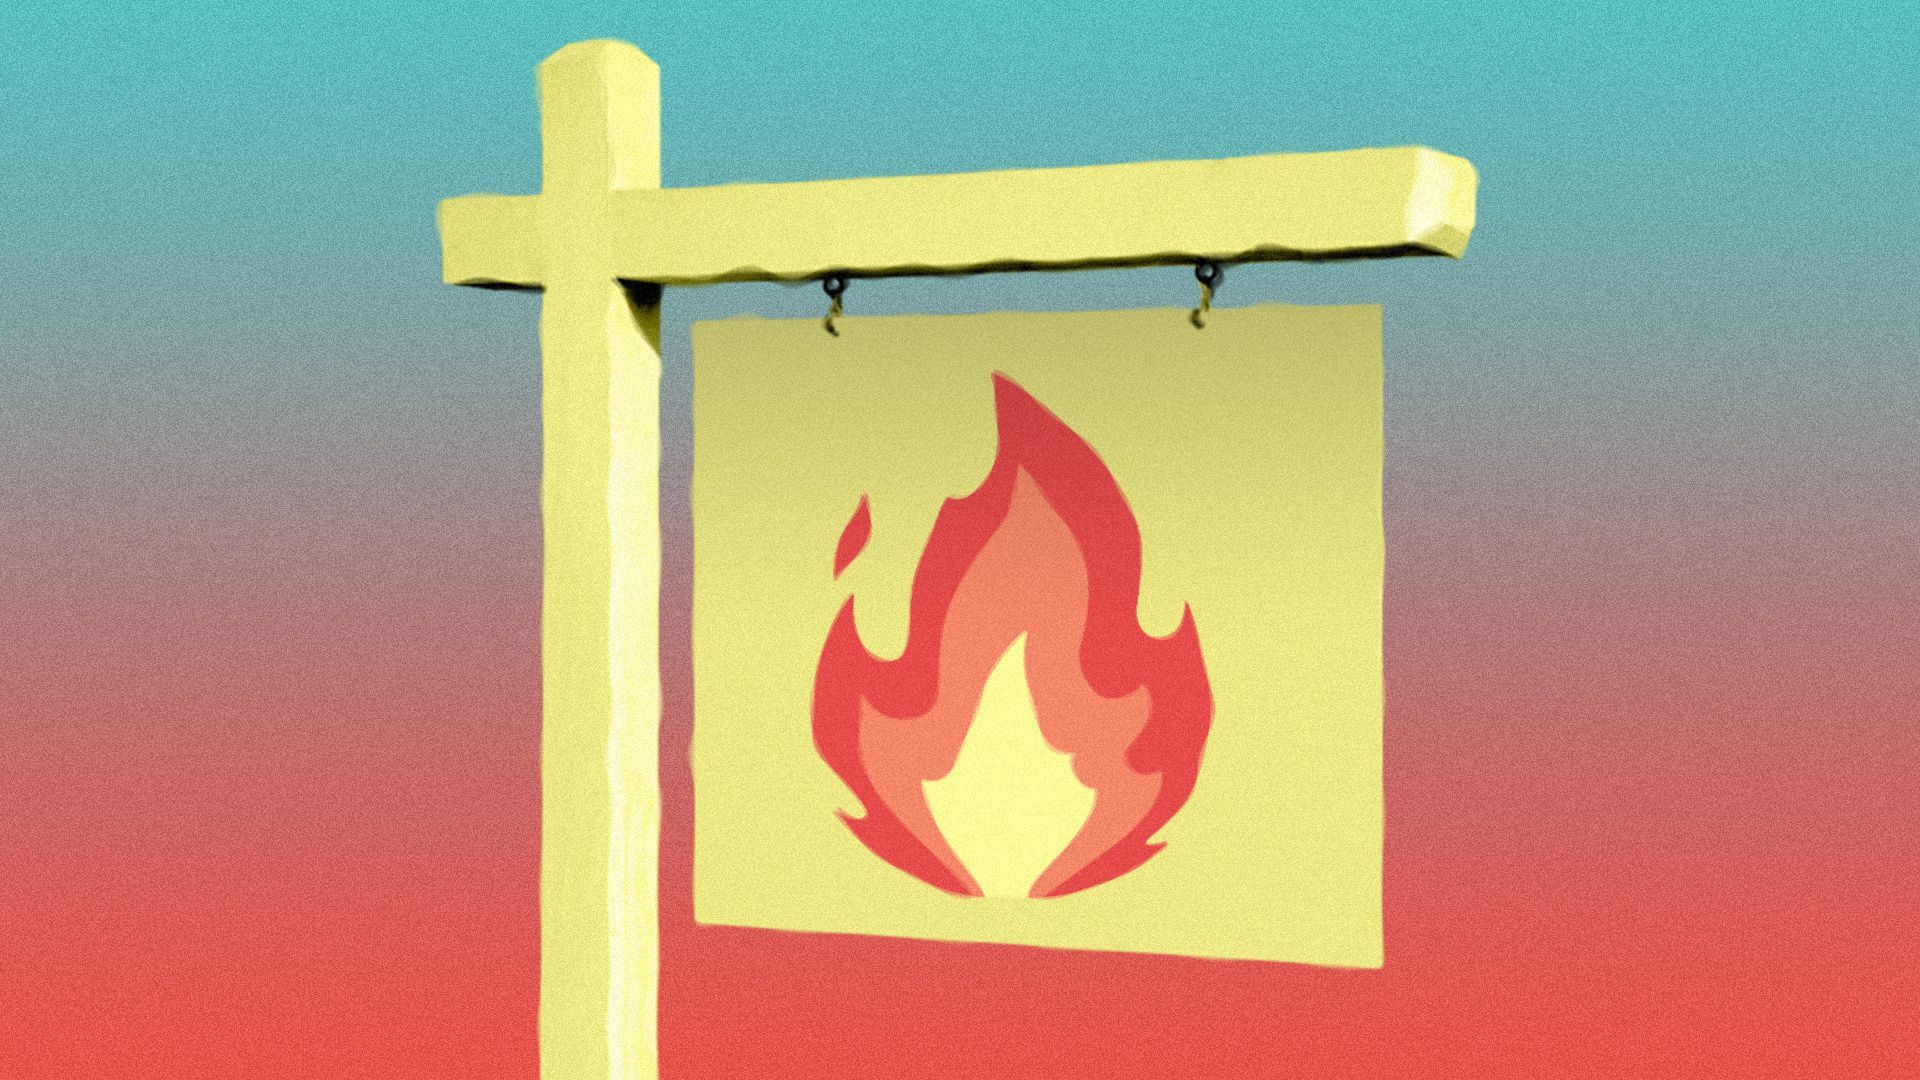 A for sale sign with a fire symbol instead of for sale details